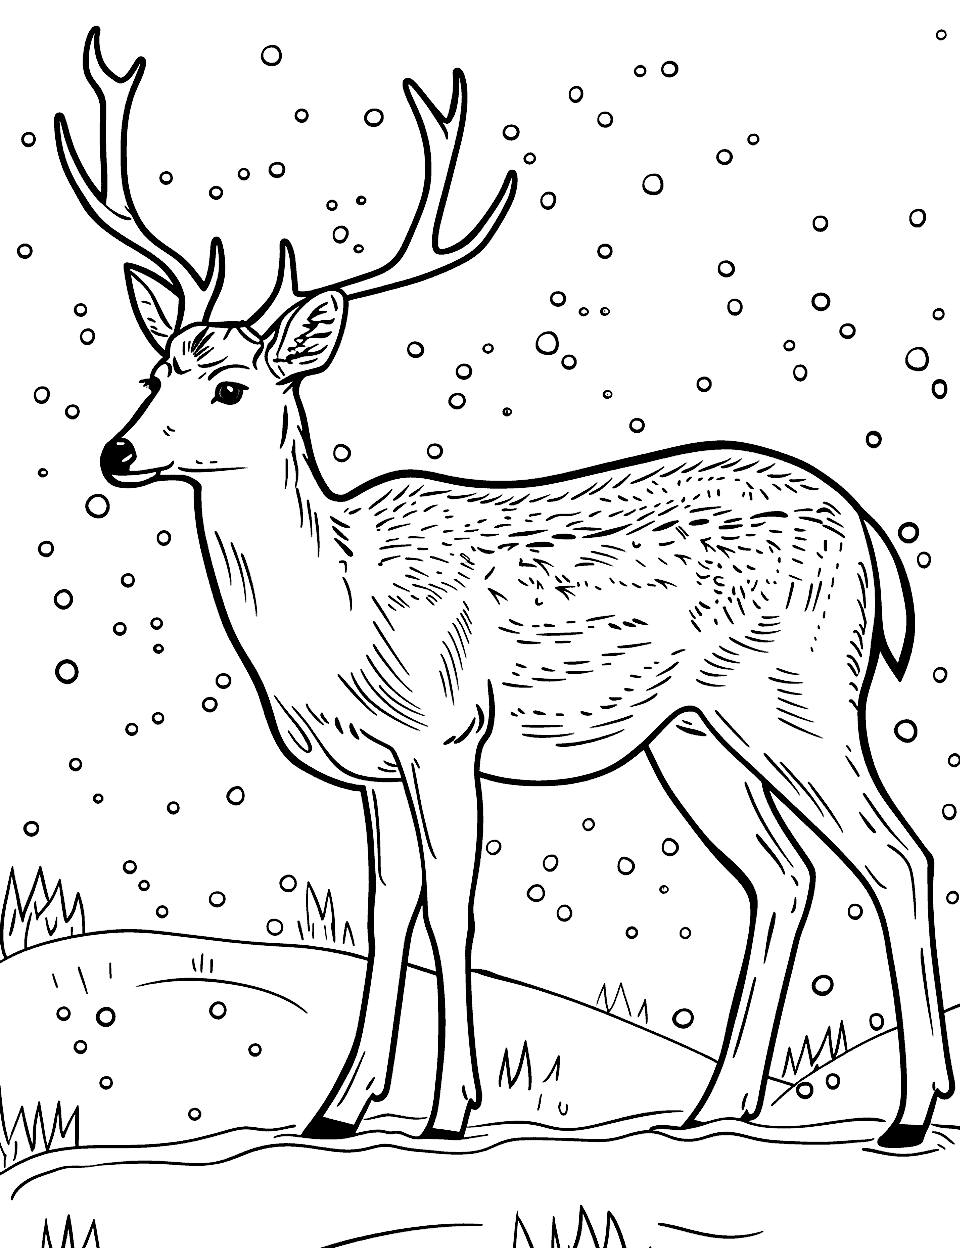 Winter Deer in Snowfall Coloring Page - A deer standing in a gentle snowfall, with snowflakes visible in the air in the spirit of Christmas.